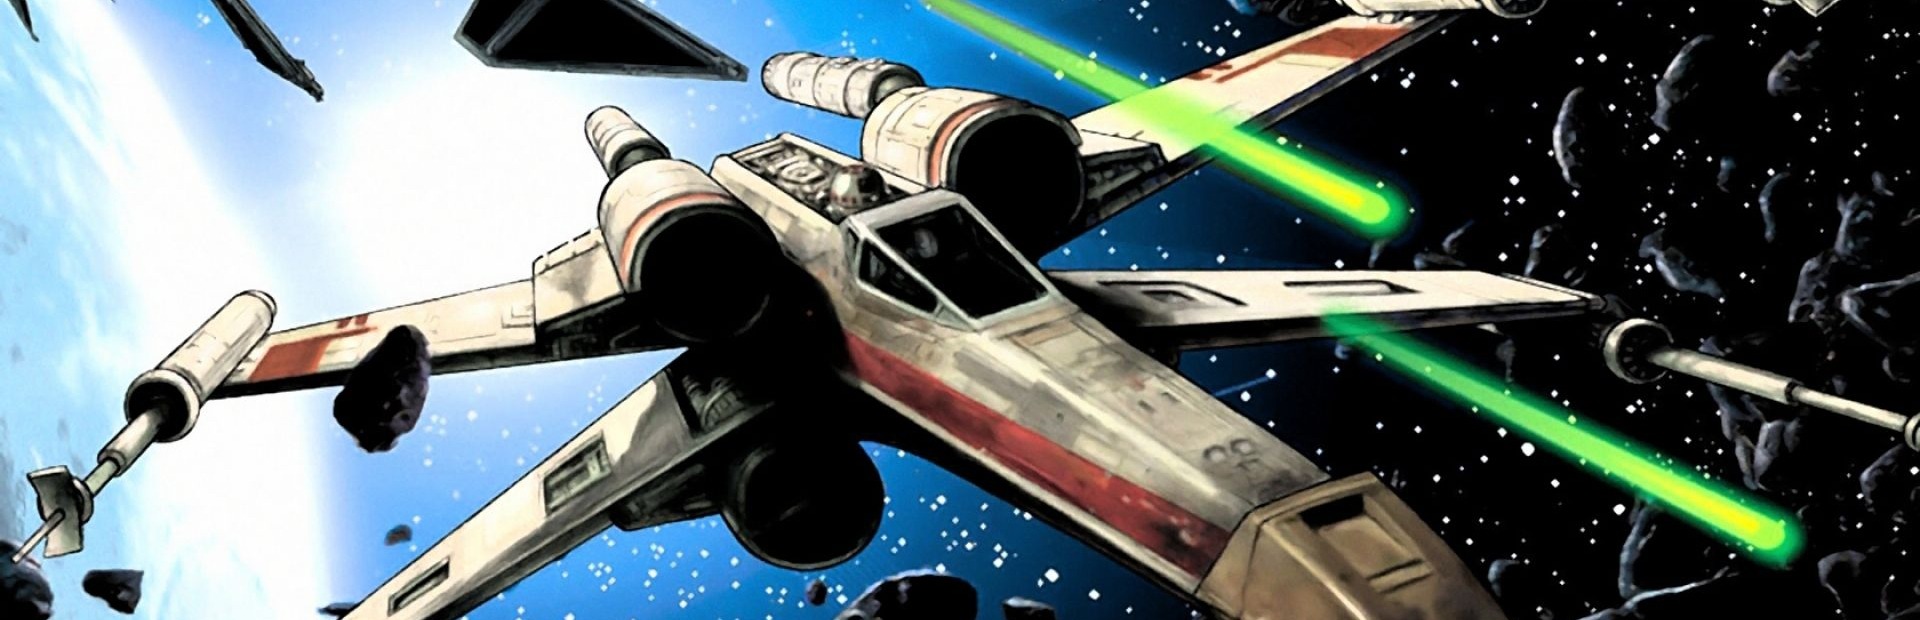 Banner Star Wars X-Wing vs TIE Fighter - Balance of Power Campaigns